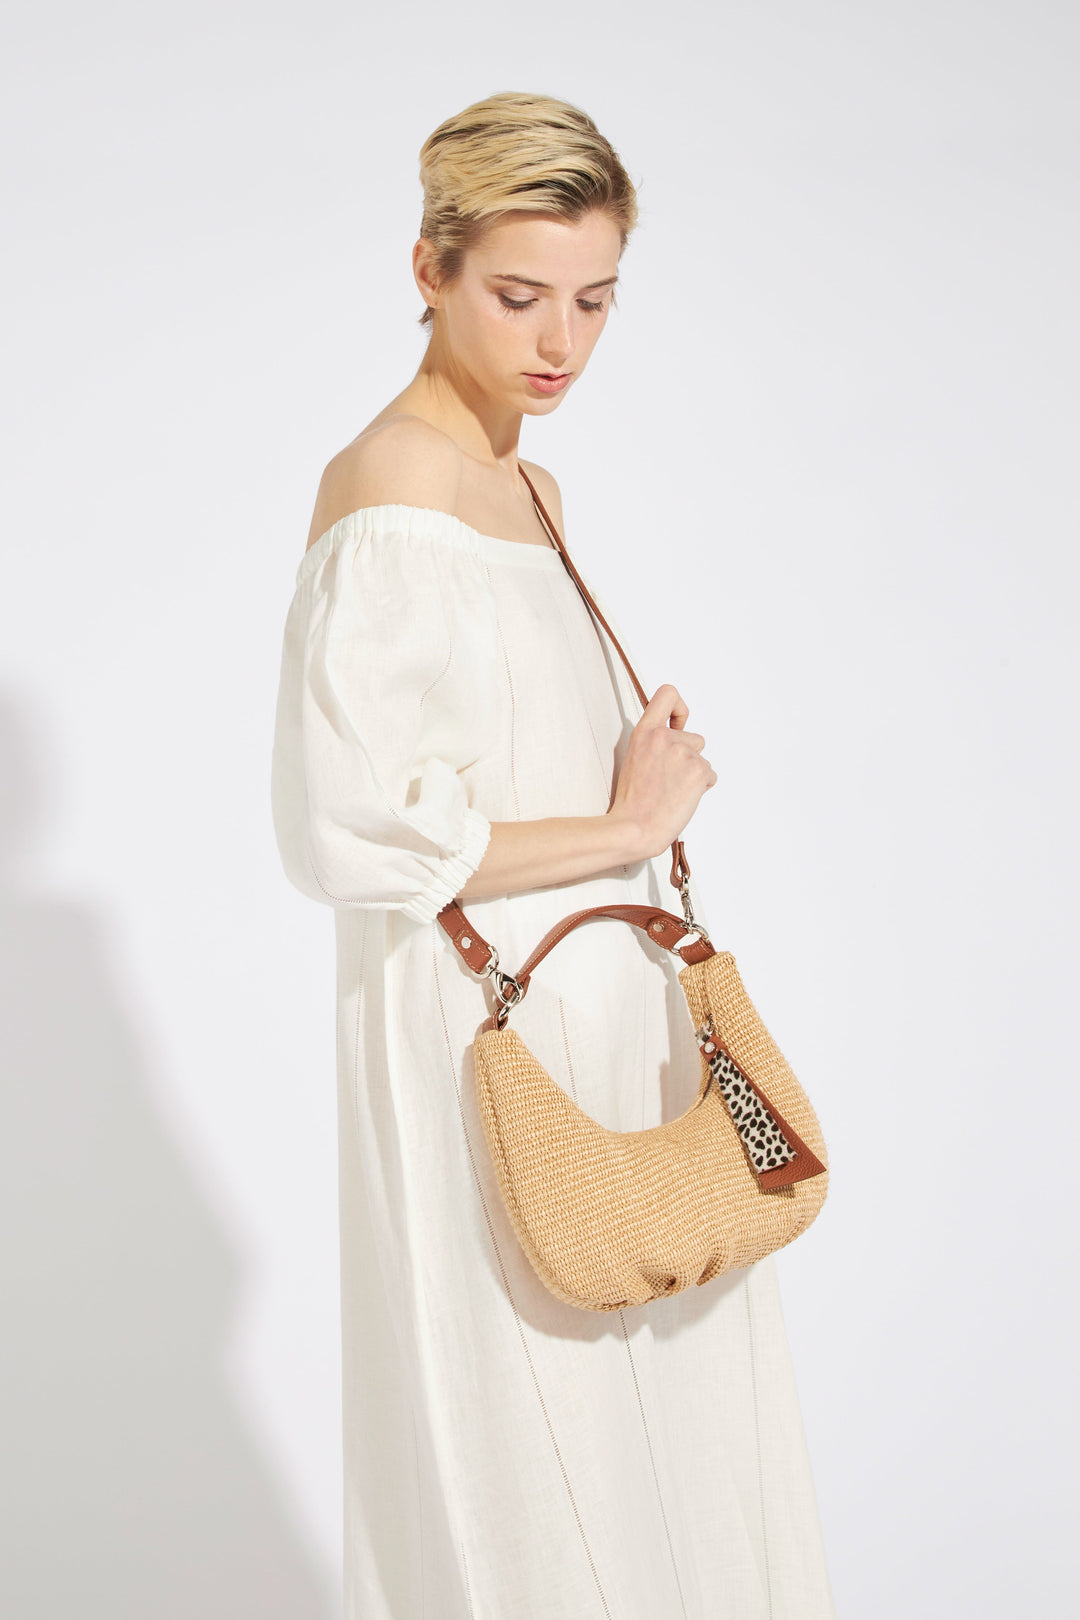 Woman in white off-shoulder dress holding woven handbag with leopard print keychain